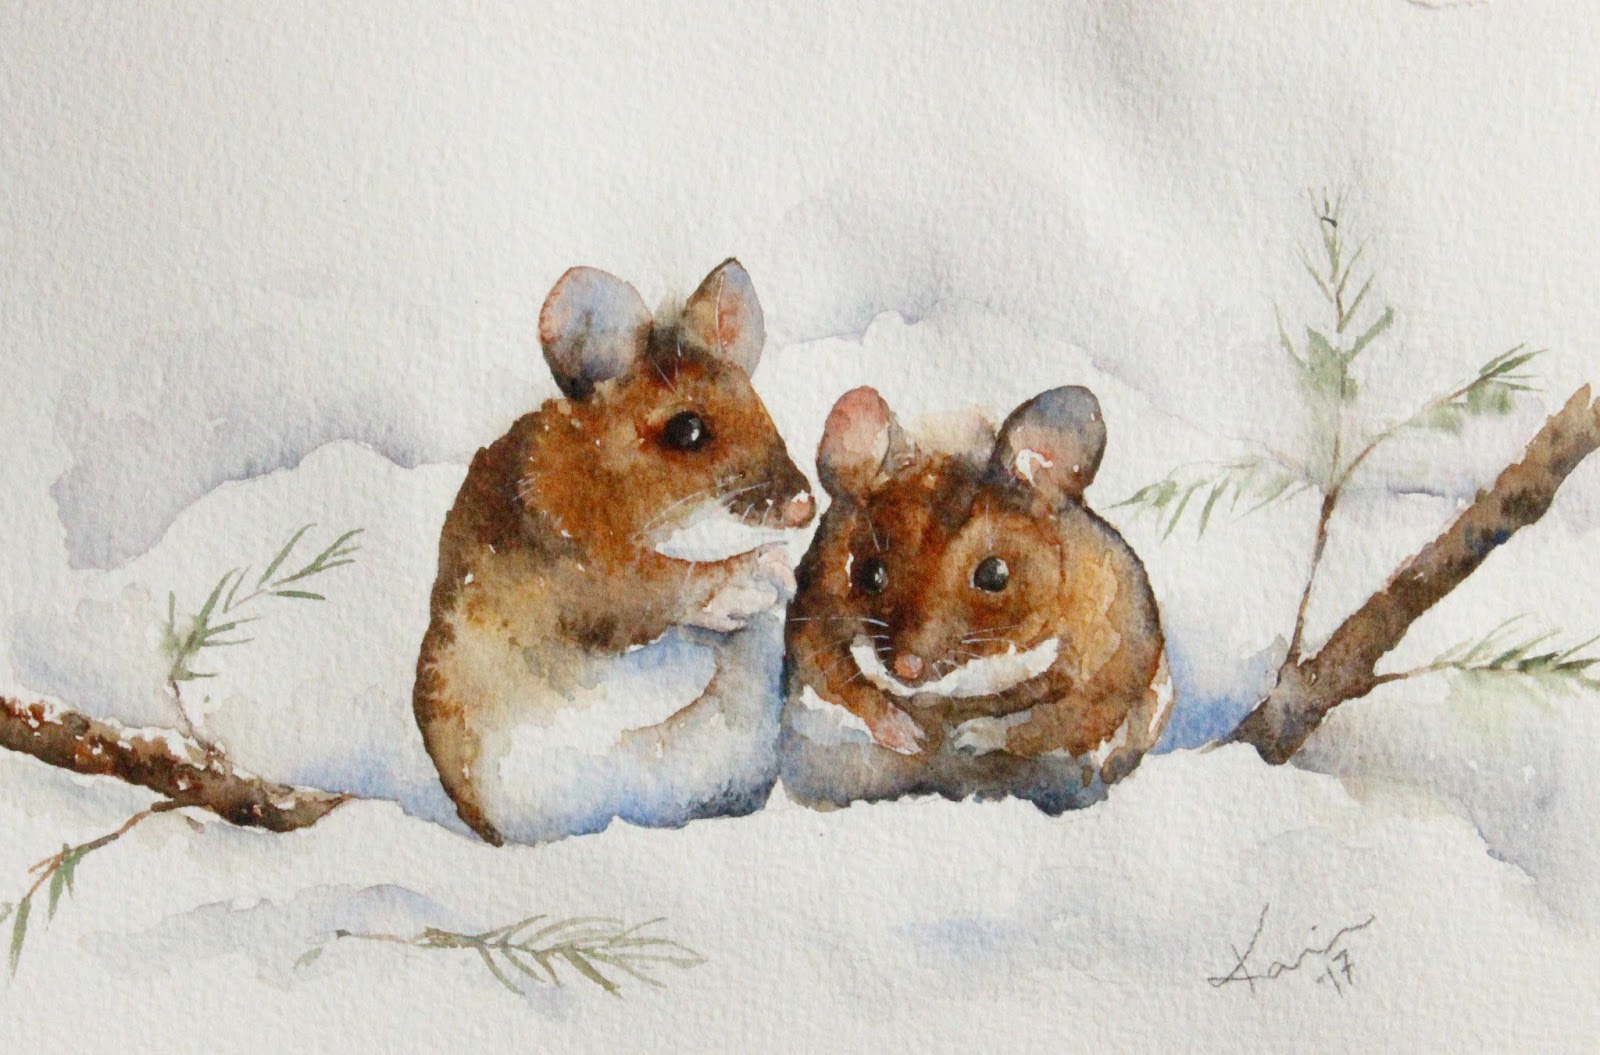 Peppermint Patty&#39;s Papercraft: Sunday Watercolor: Mice in Snow